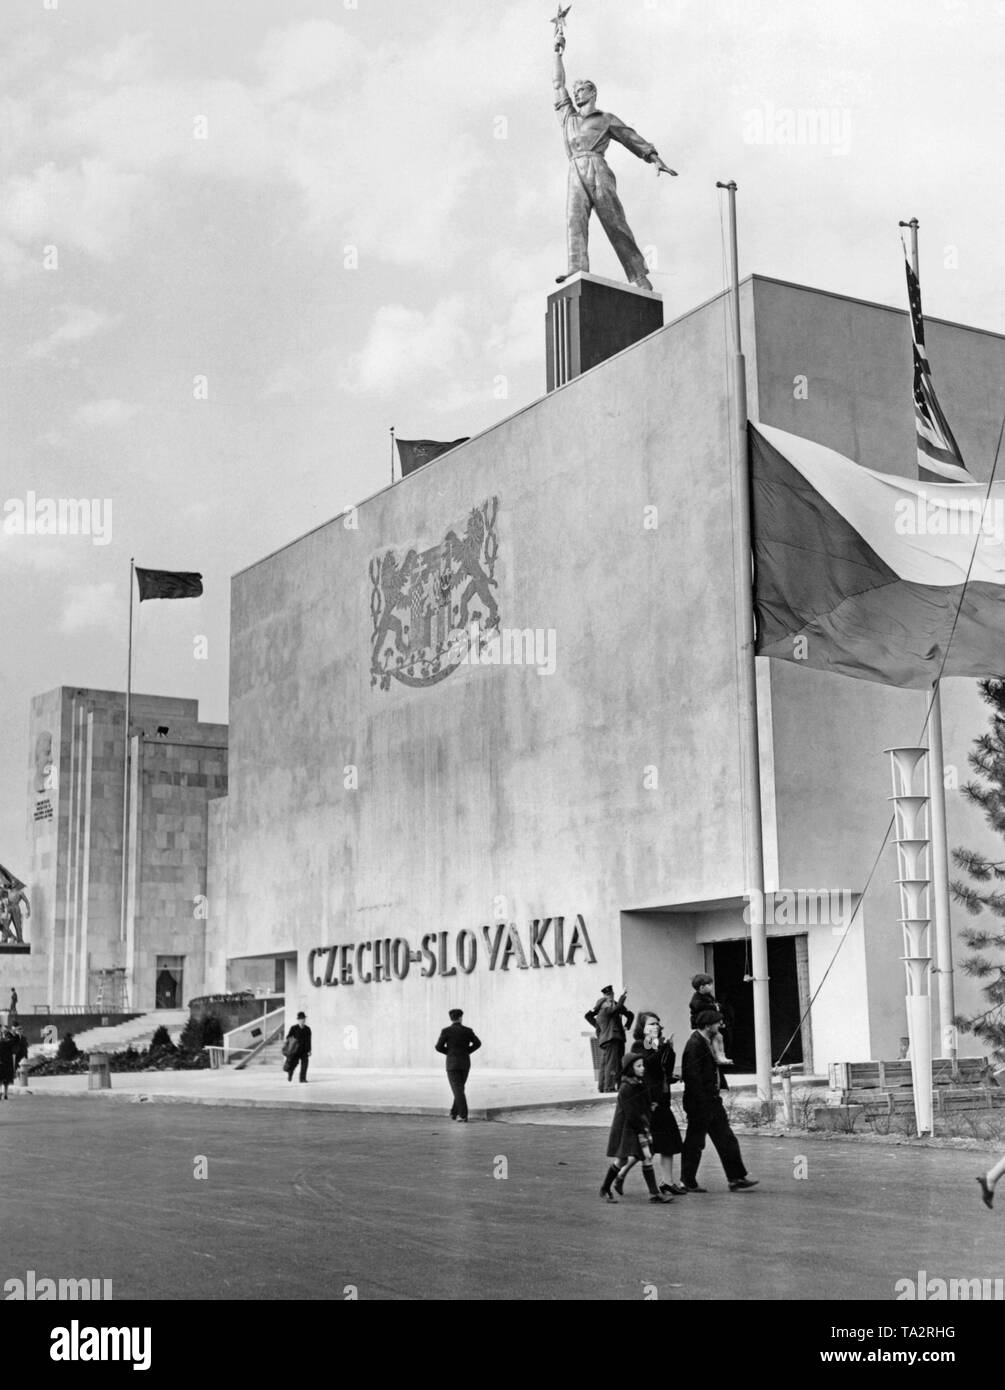 The Czechoslovak Pavilion at the World's Fair in New York, 1939. The flag of Czechoslovakia is drawn up at half-mast. In May 1939, the Pavilion remains closed. In March 1939, Slovakia split from the Czech Republic on Hitler's command, and Bohemia and Moravia were occupied by the German troops. Stock Photo